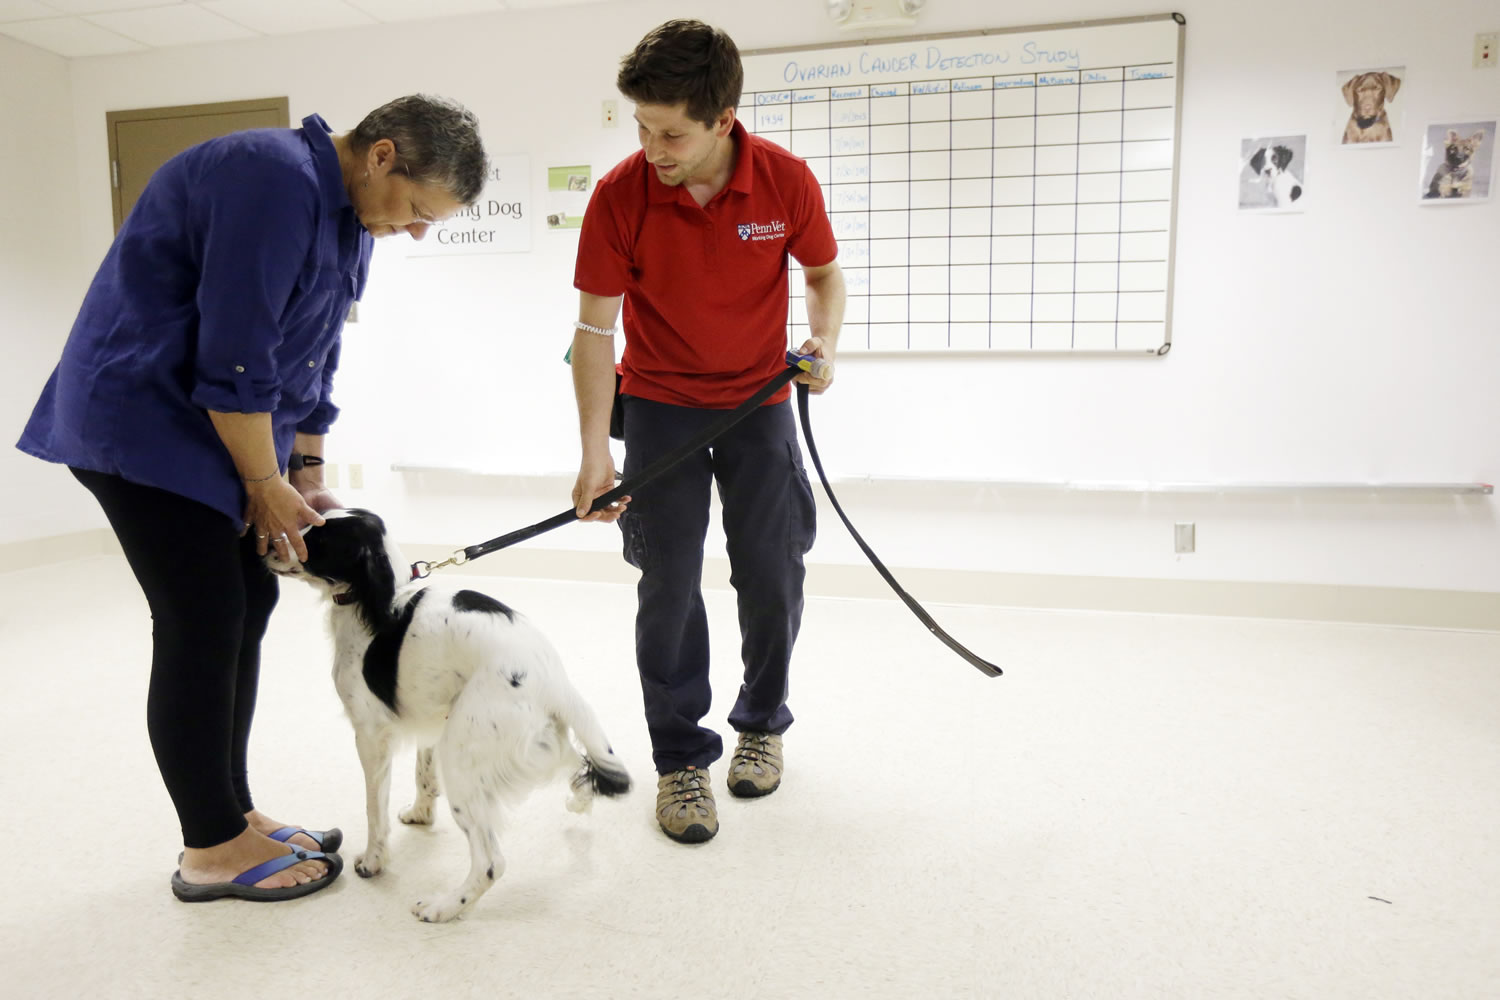 Jonathan Ball, right, introduces Marta Drexler, an ovarian cancer patient, to McBaine, who is in the first round of training for a study that will eventually involve detecting cancerous tissue at Penn Vet Working Dog Center in Philadelphia.